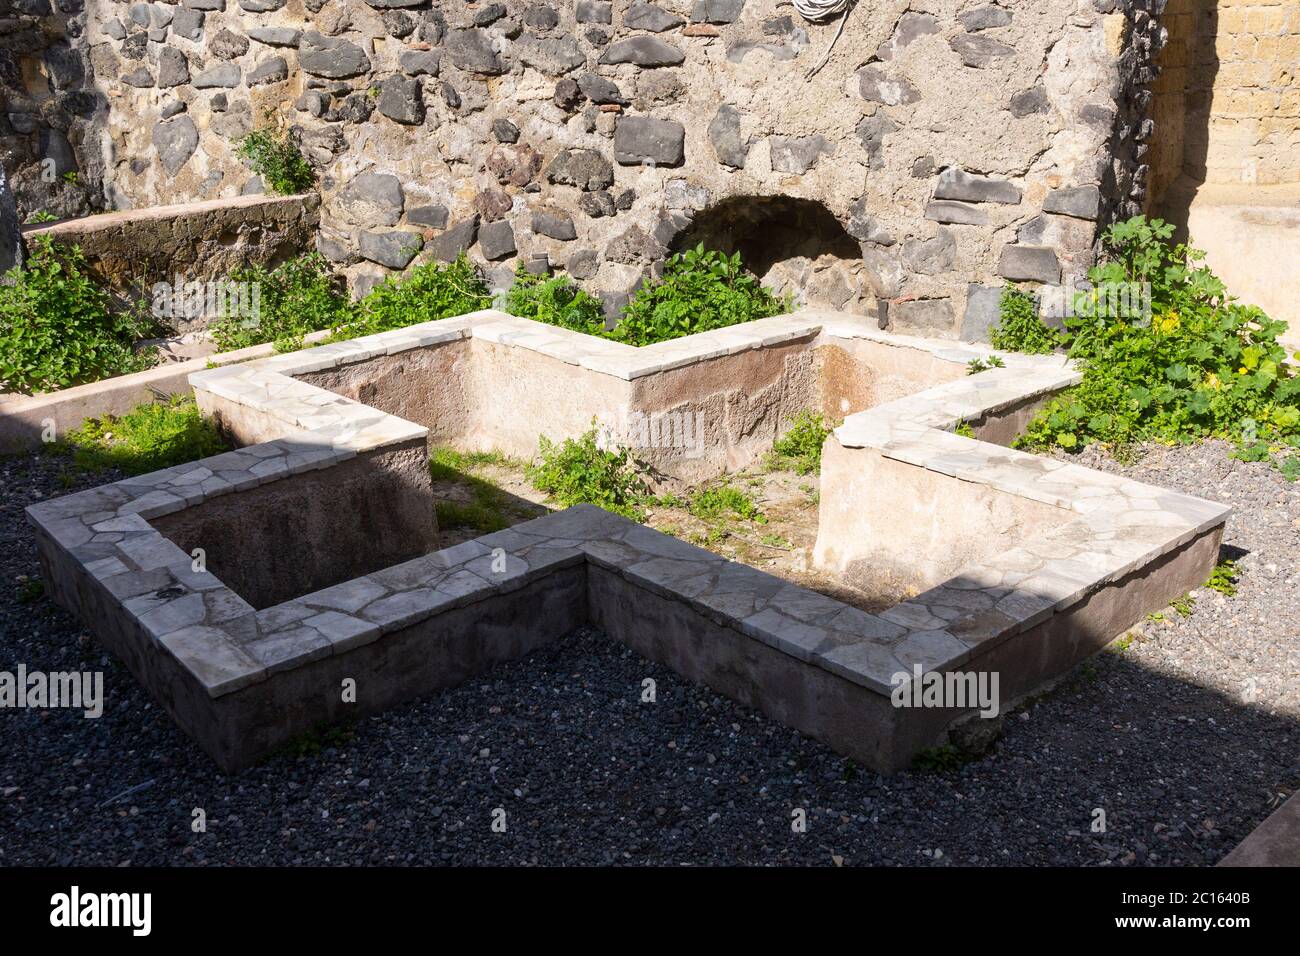 A cruciform or cross shaped marble Roman piscina in Peristyle 10 in the Casa di Galba (House of Galba), ancient city of Herculaneum, Italy Stock Photo